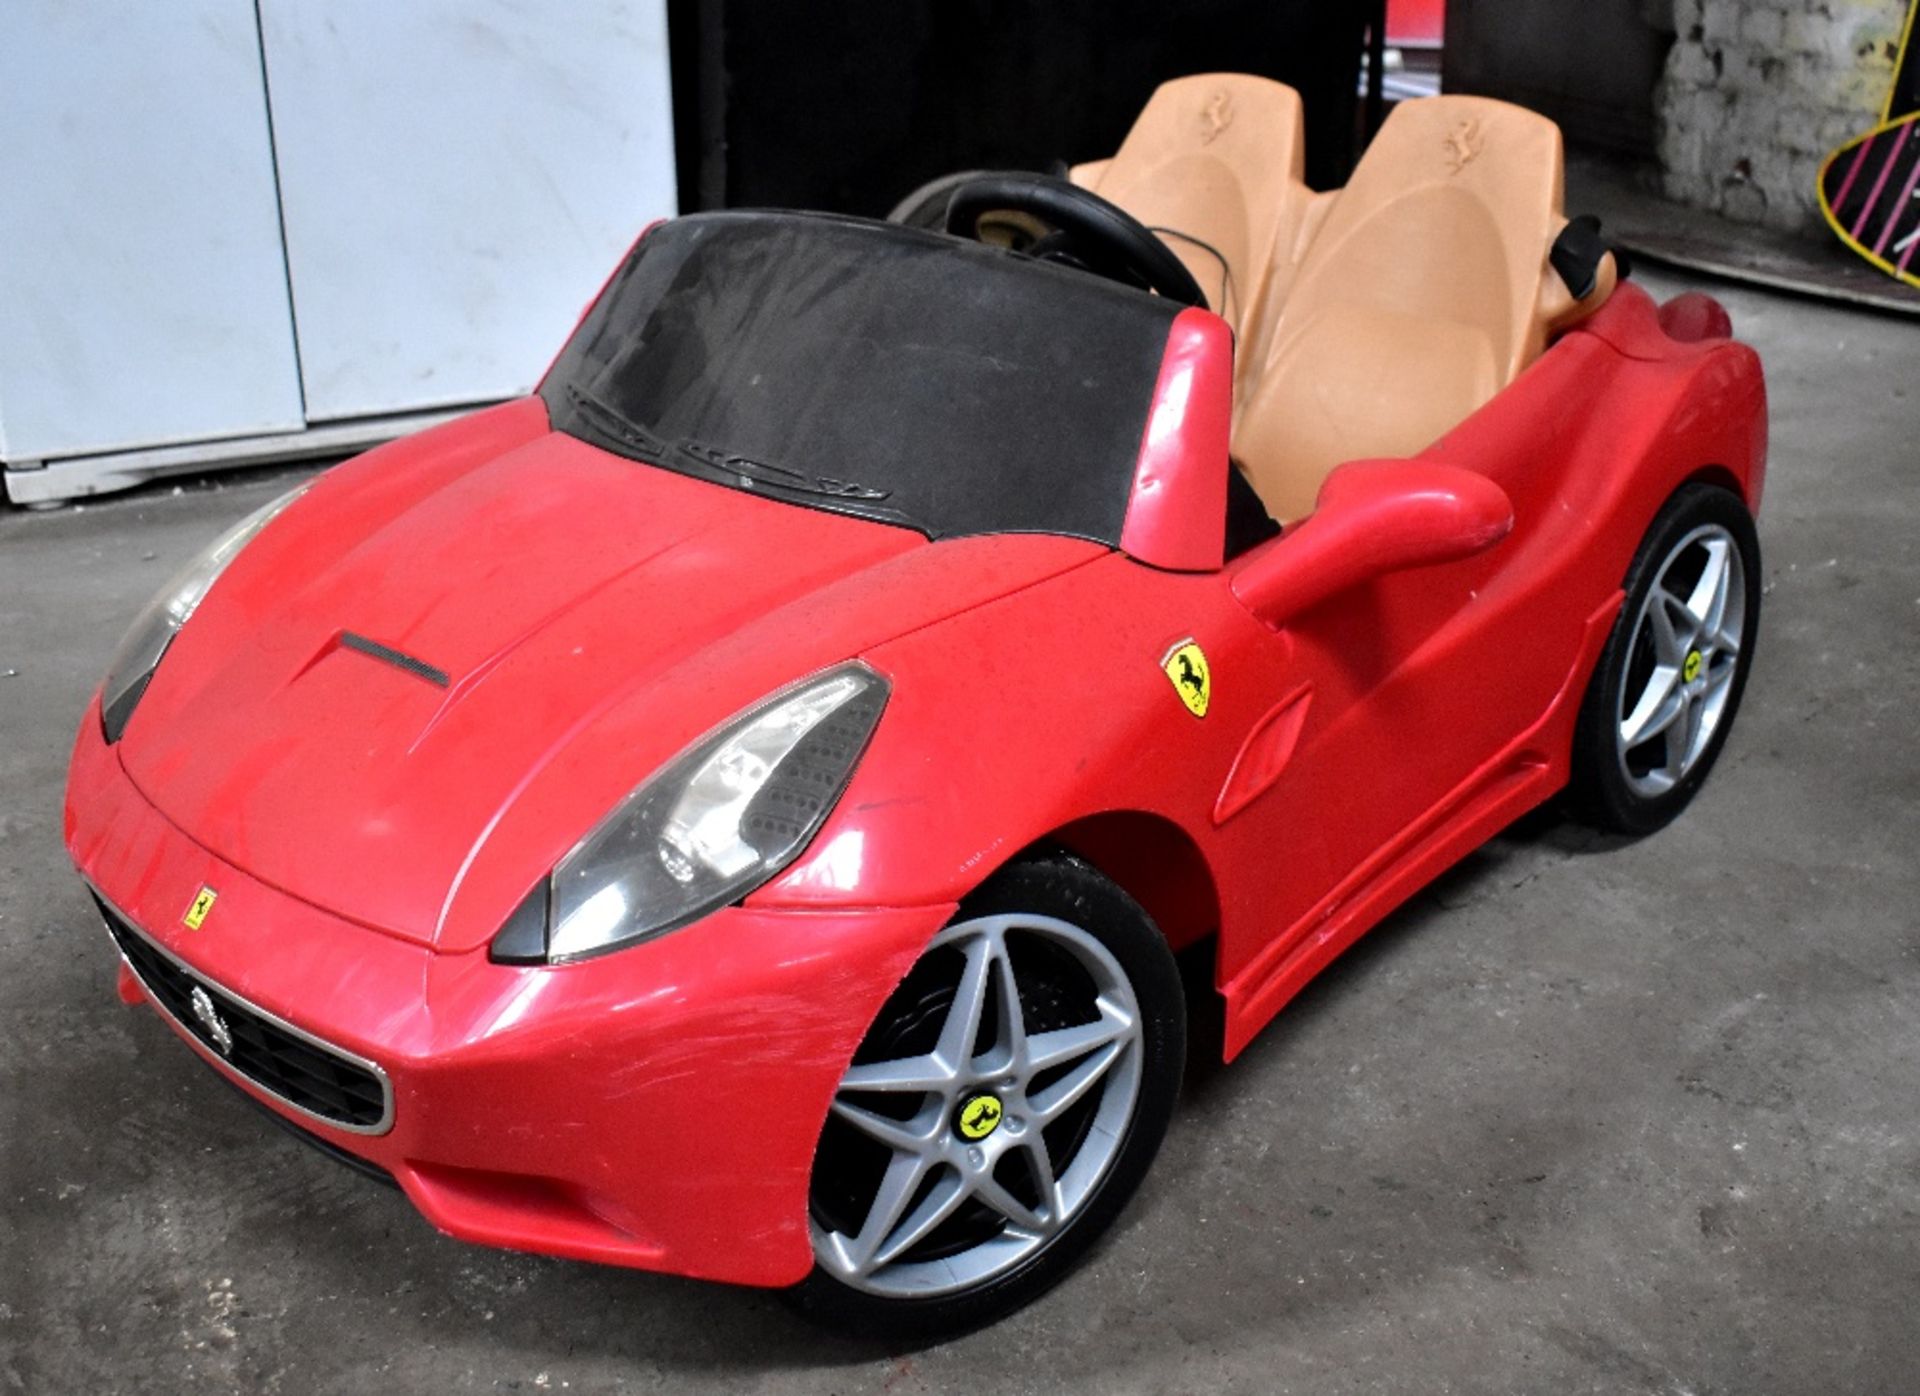 FEBER; a children's two-seat electric ride-along model of a convertible Ferrari (with charger,